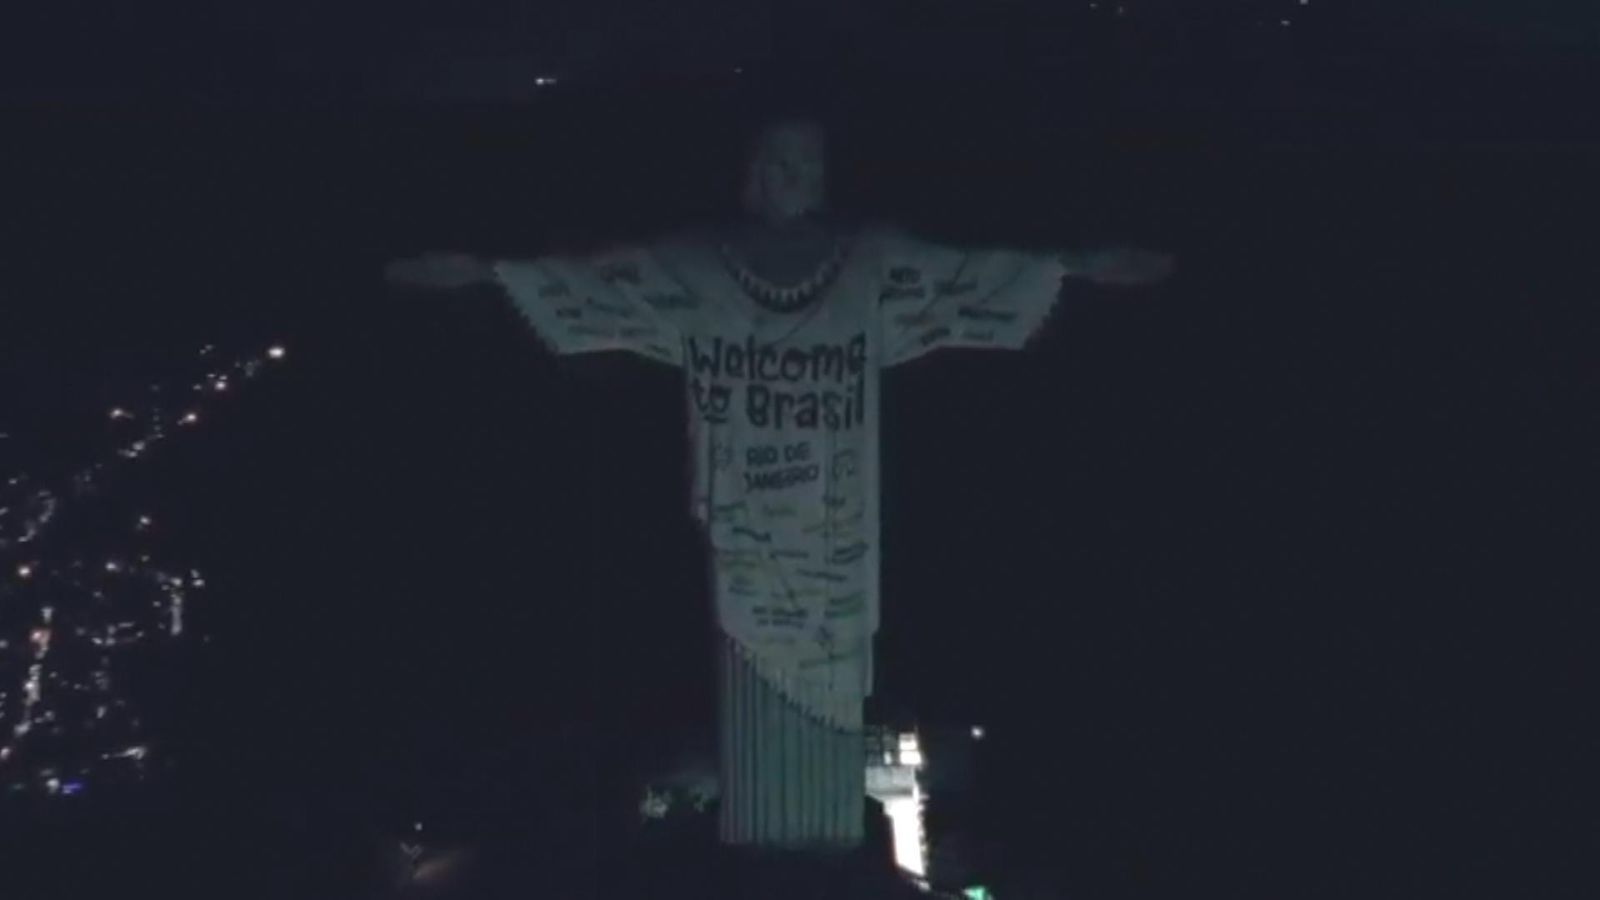 Taylor Swift T-shirt projected onto Brazil's Christ the Redeemer